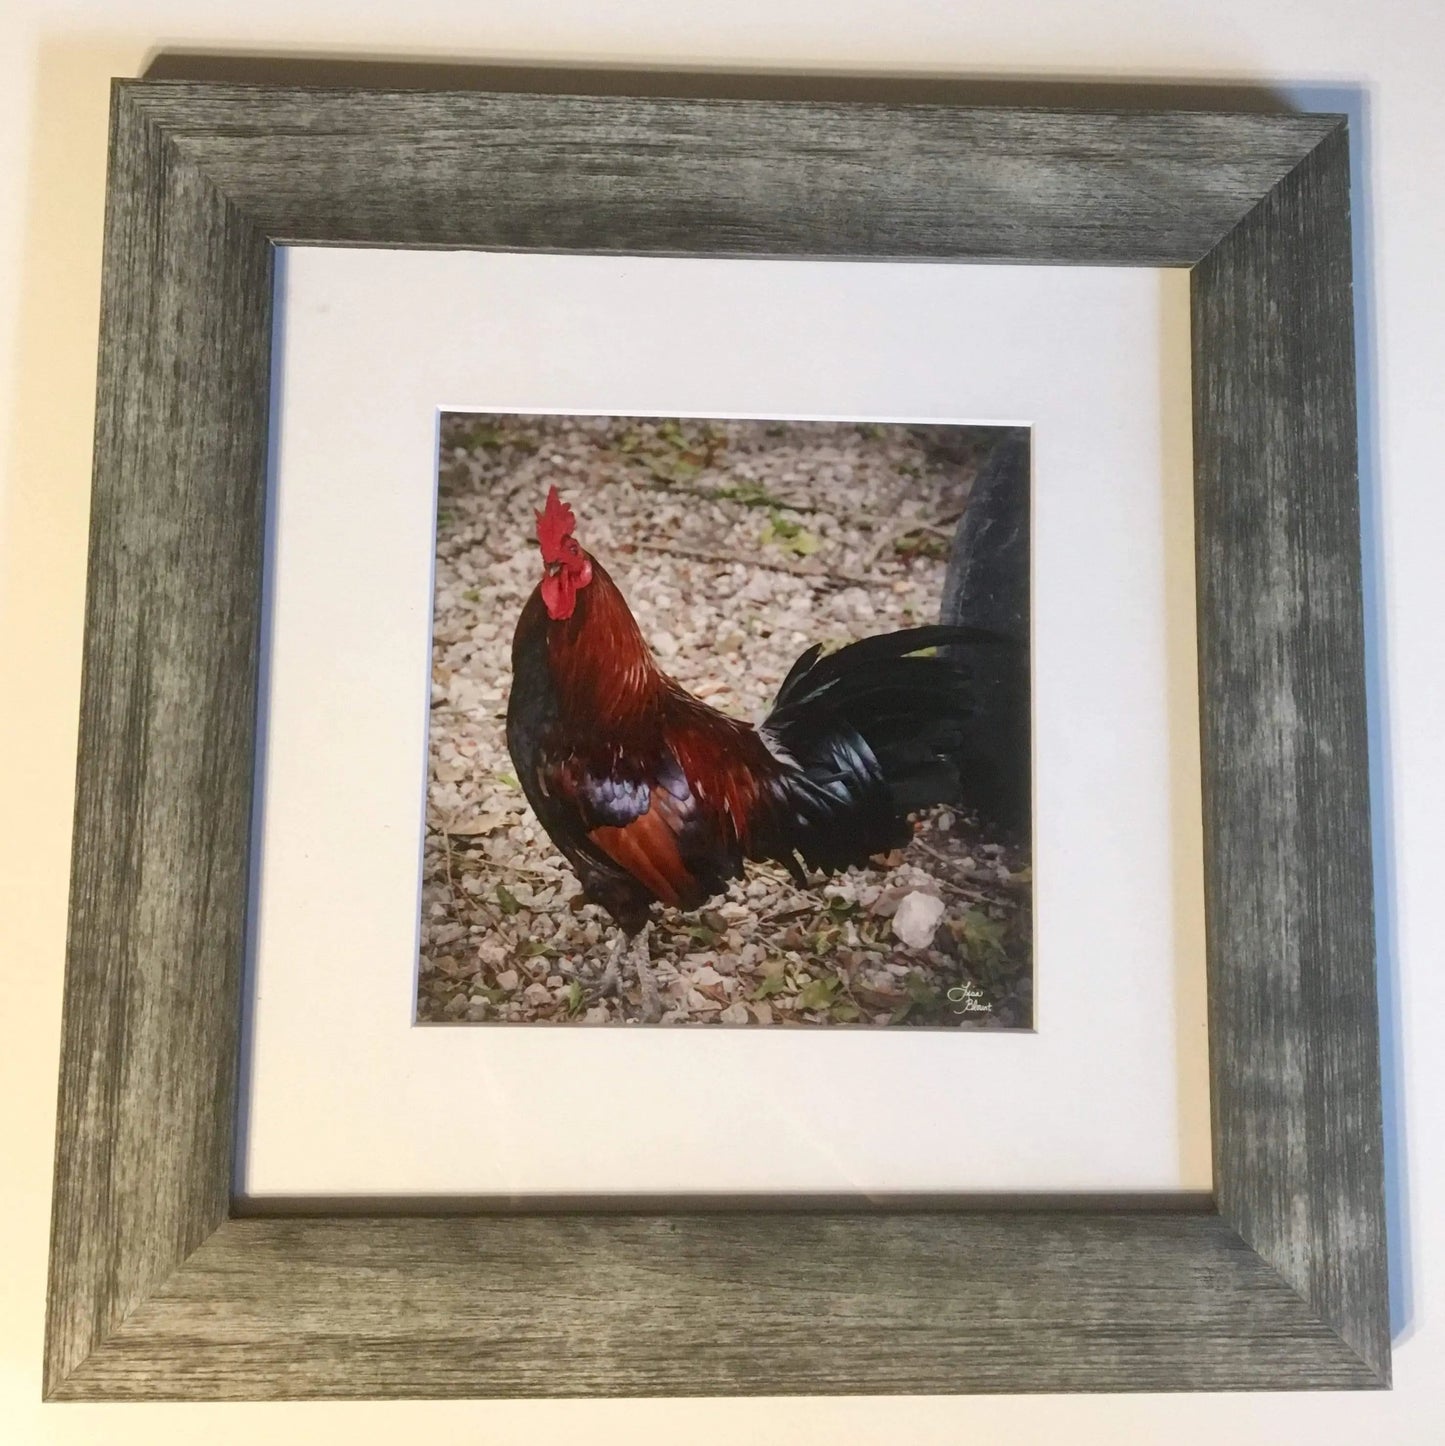 Key West Rooster - SMALL PRINT - Lisa Blount Photography